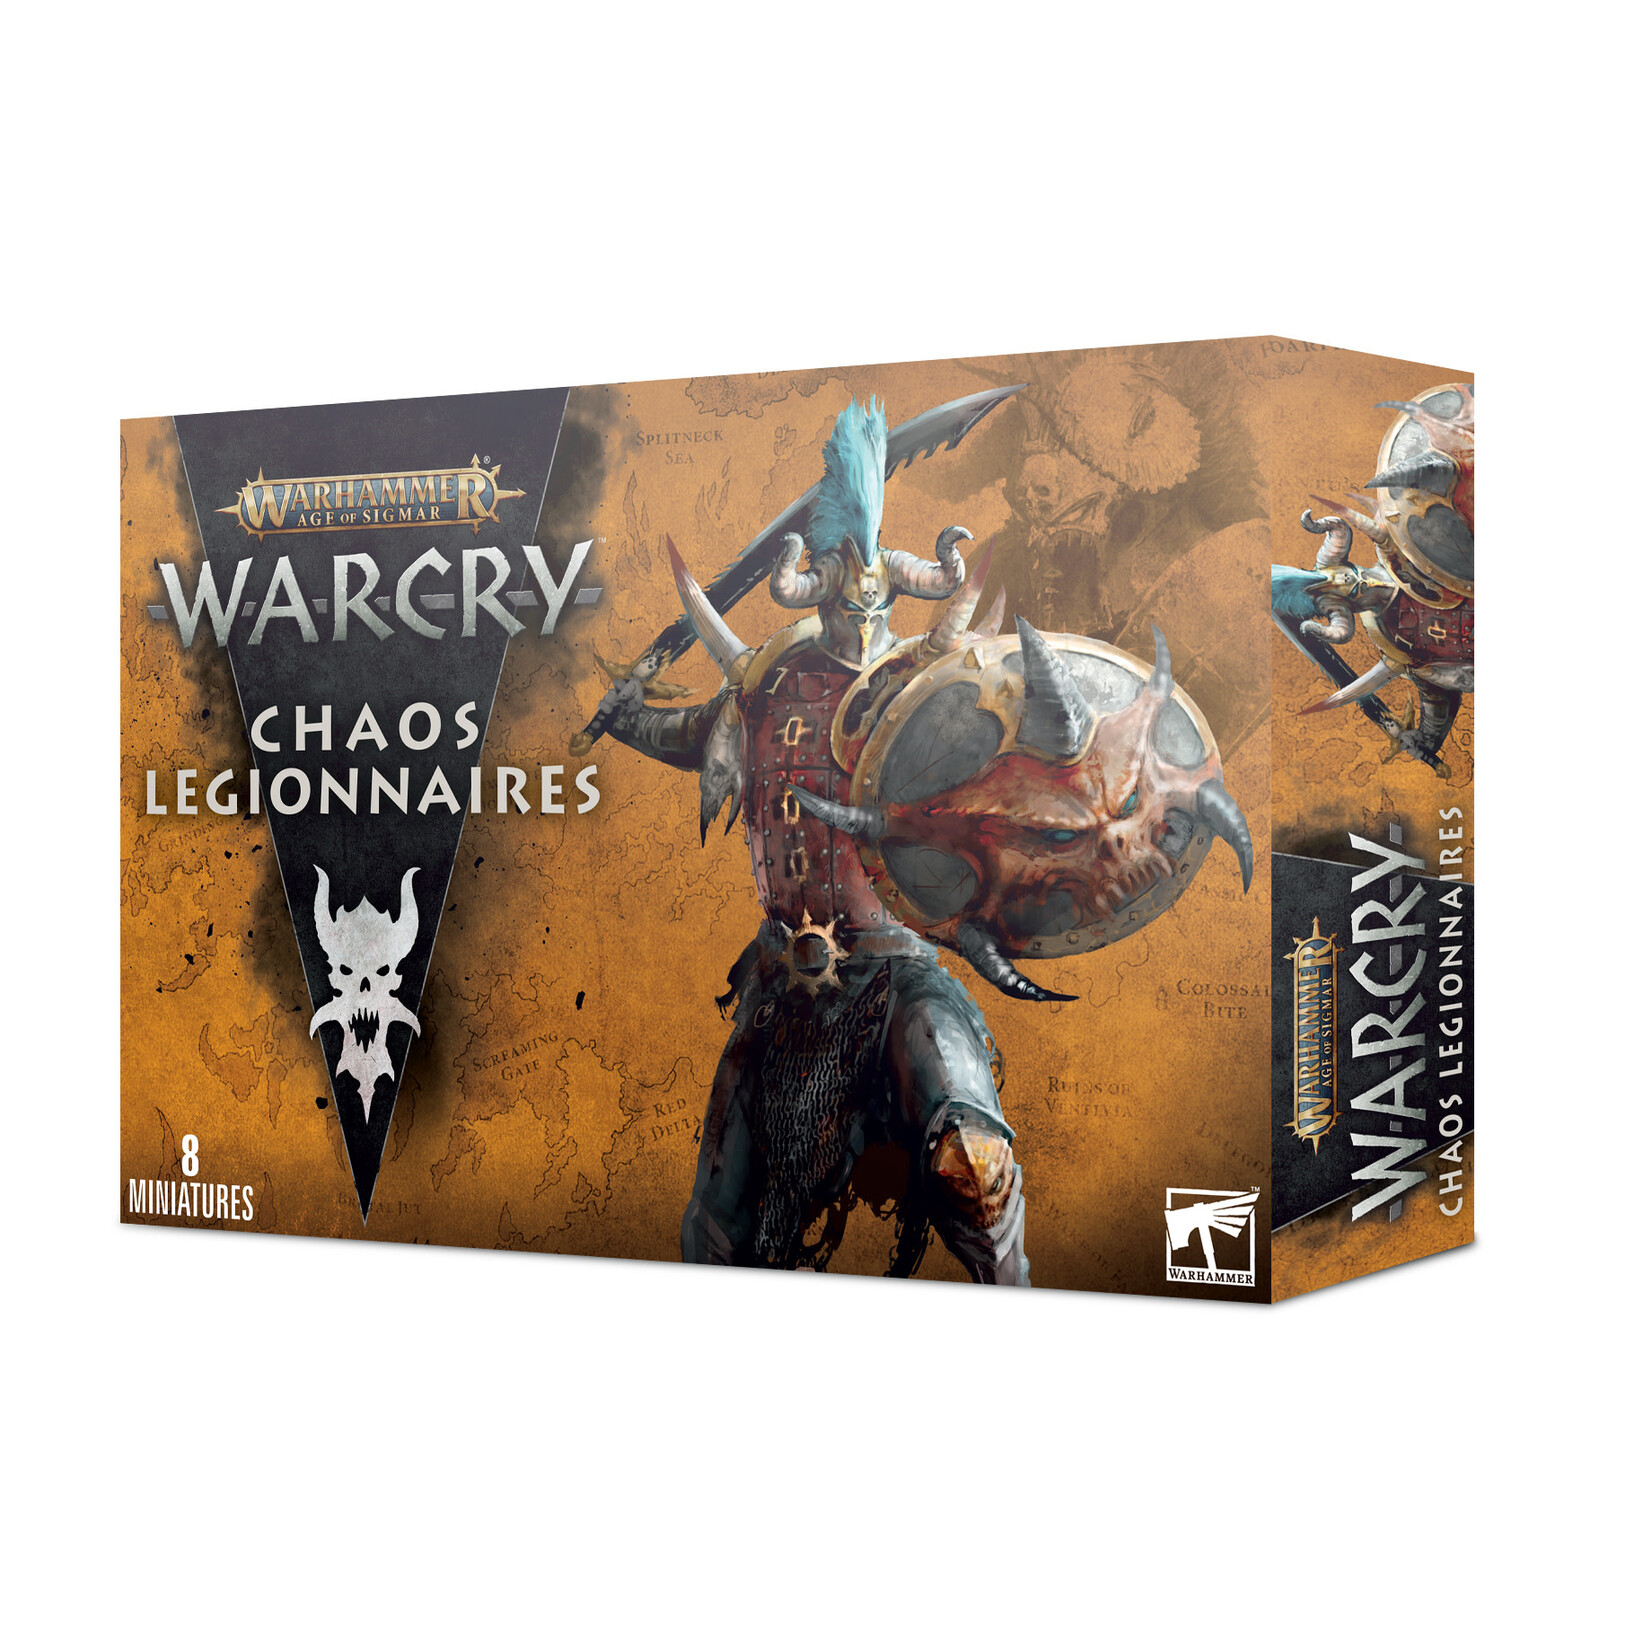 Games Workshop Warhammer Age of Sigmar: Warcry - Chaos Legionaires